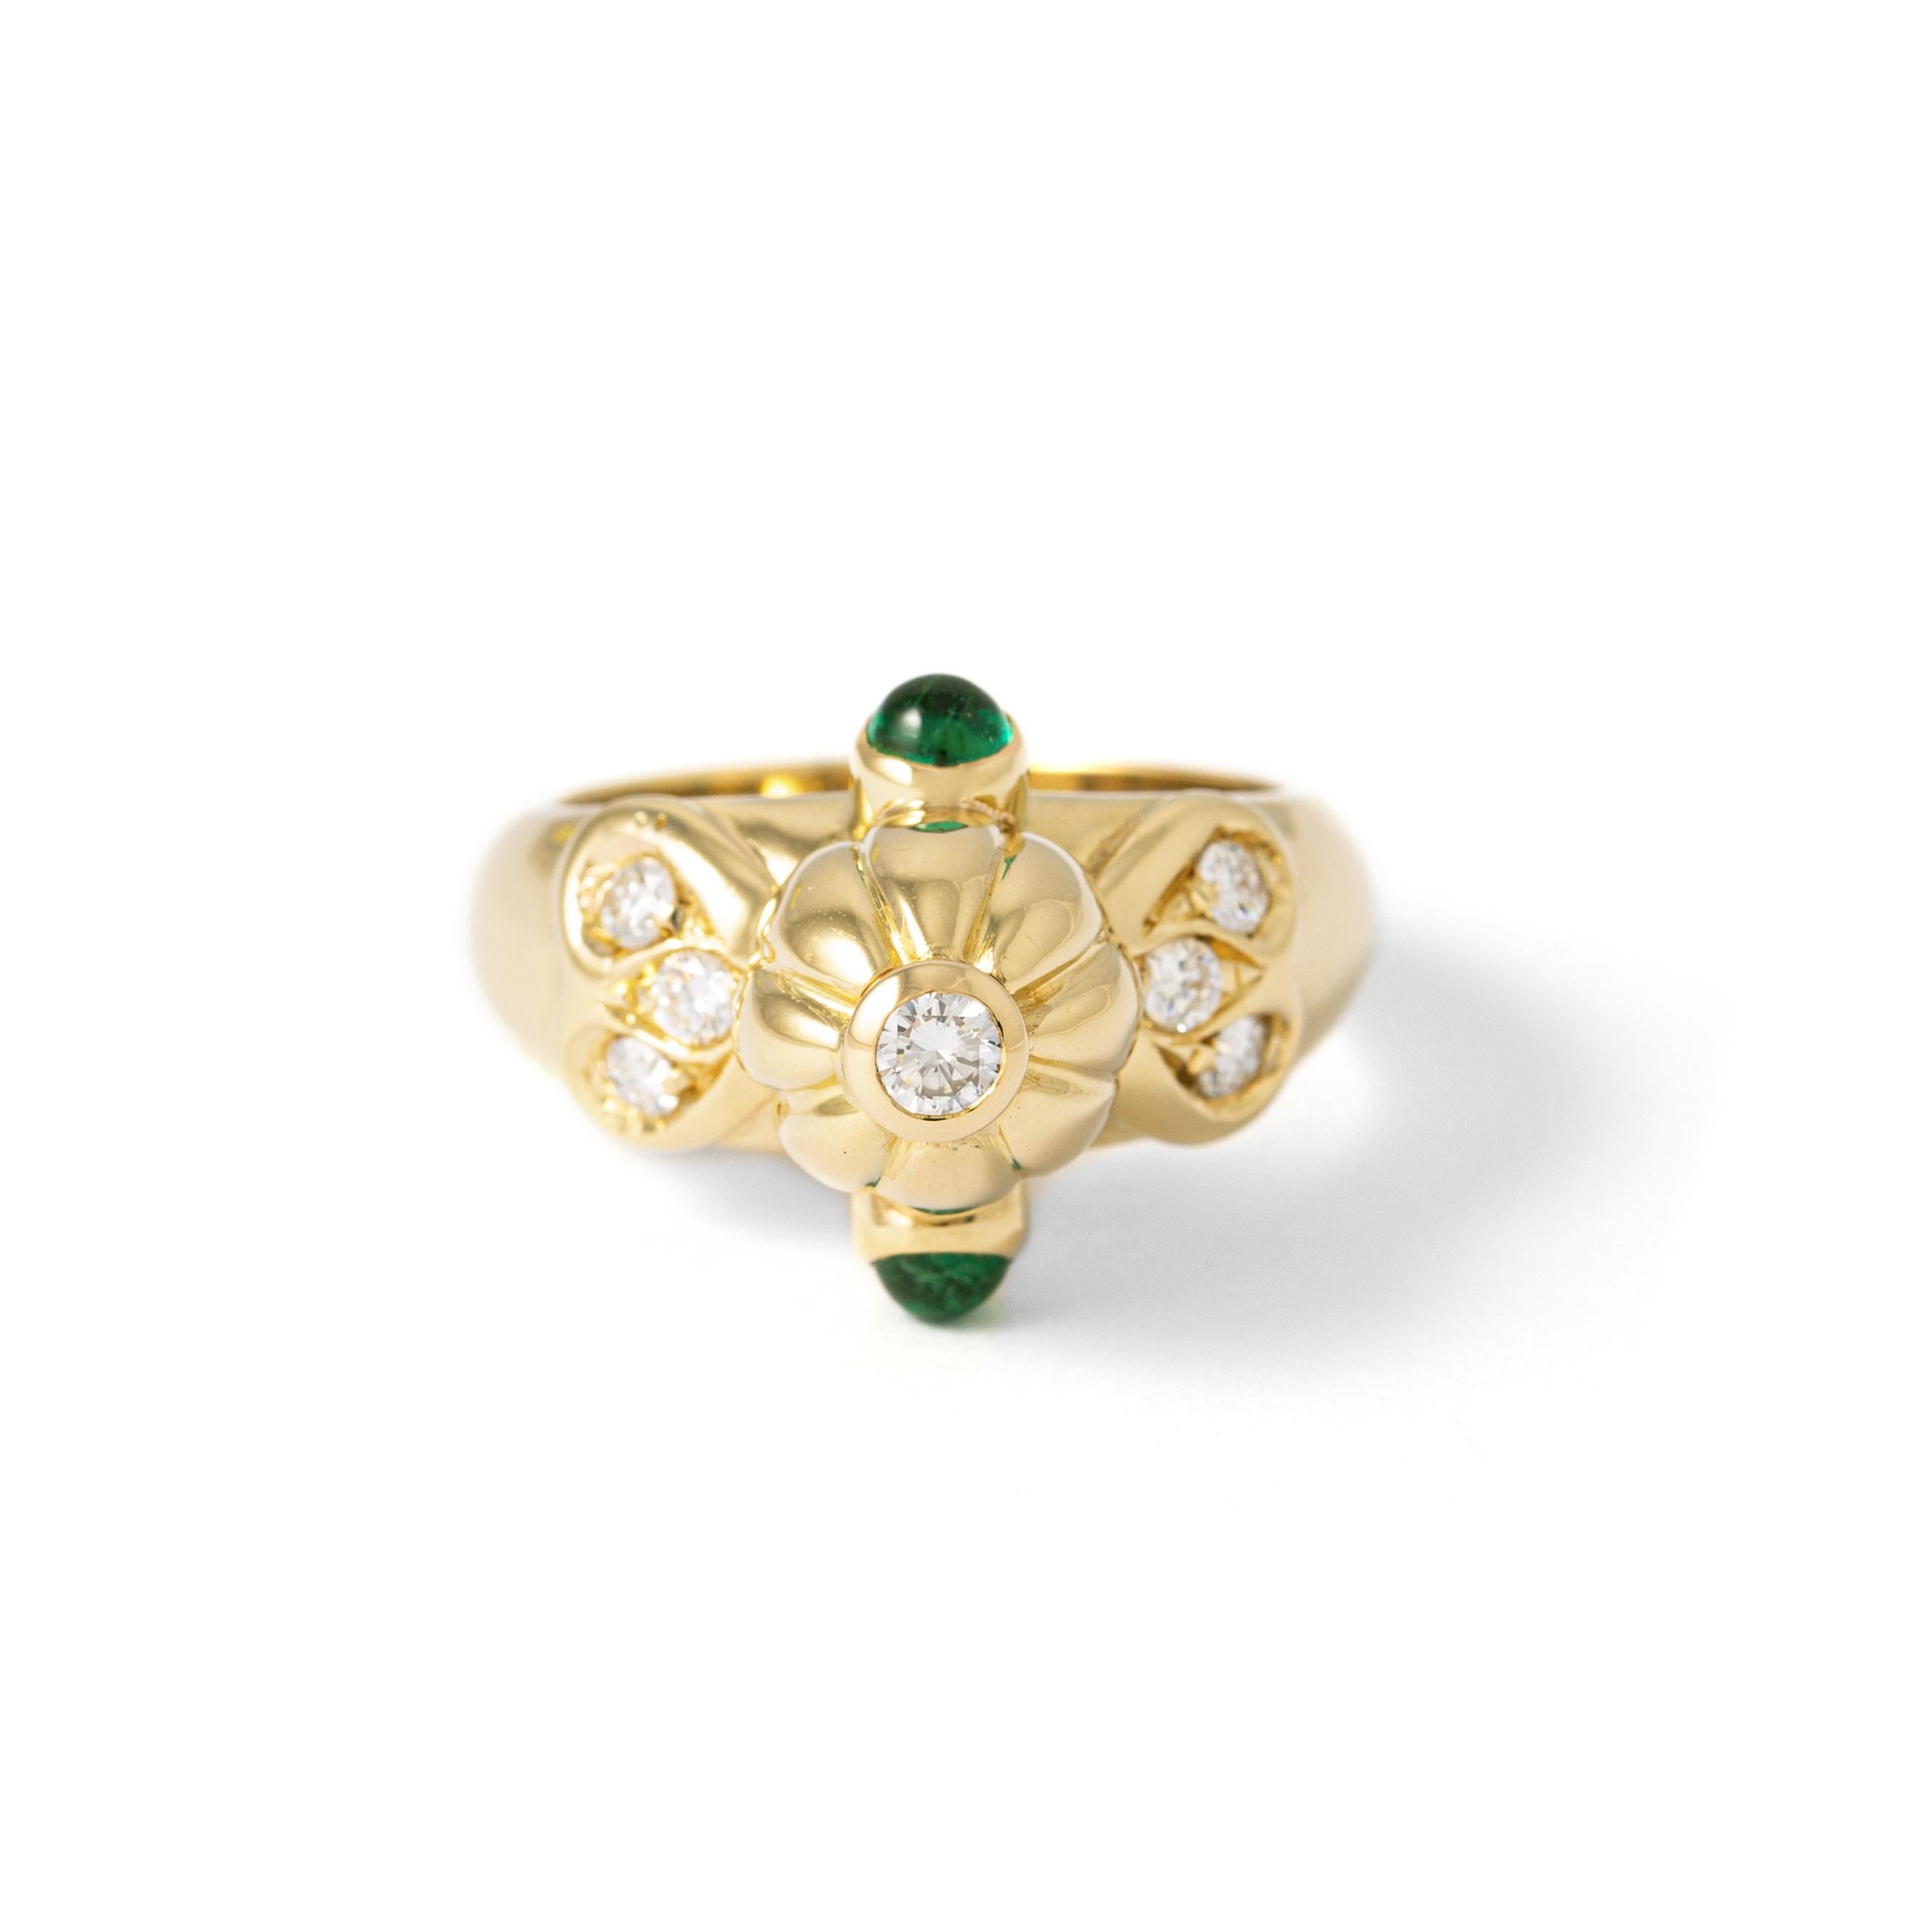 Ring in 18K yellow gold set with diamonds and emeralds.
Size 53    